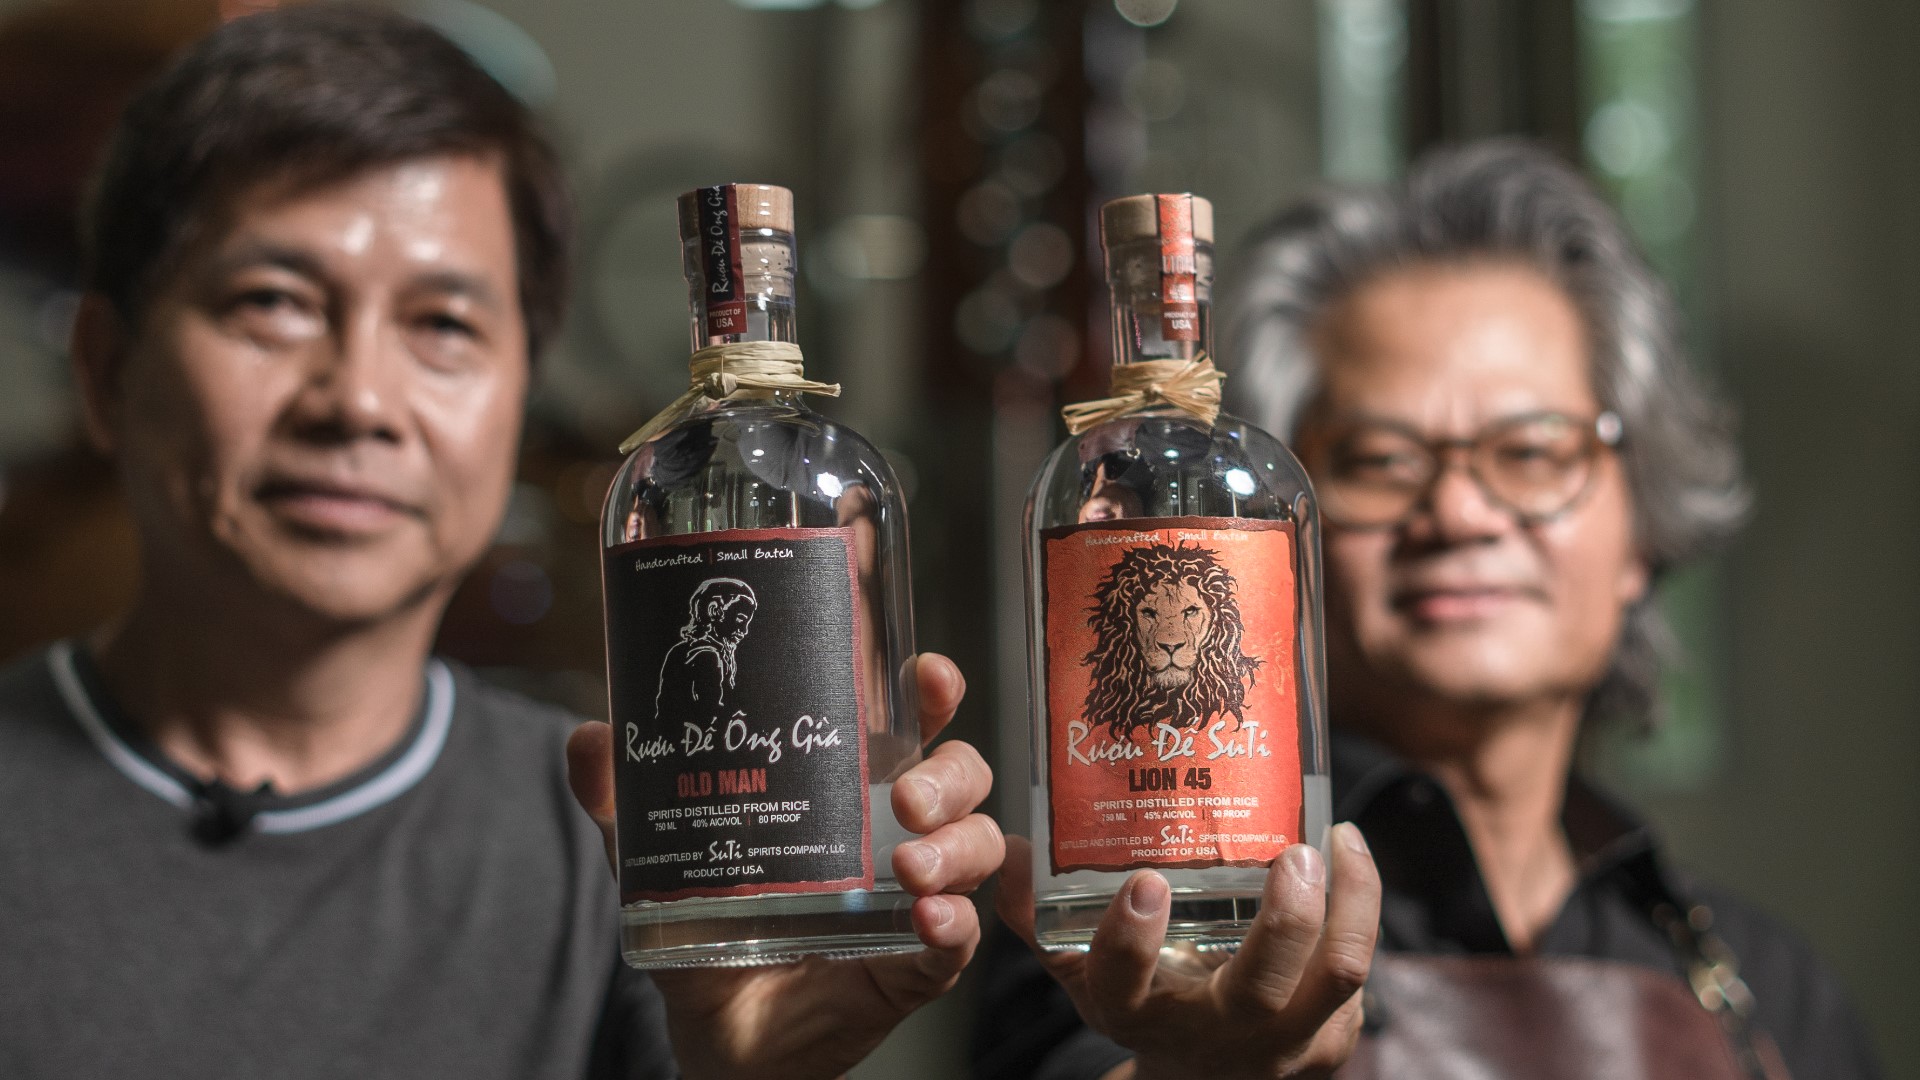 When Suy and Tien couldn't find rượu đế in the US, they decided to make it themselves. Their traditional Vietnamese rice liquor can only be bought at SuTi.